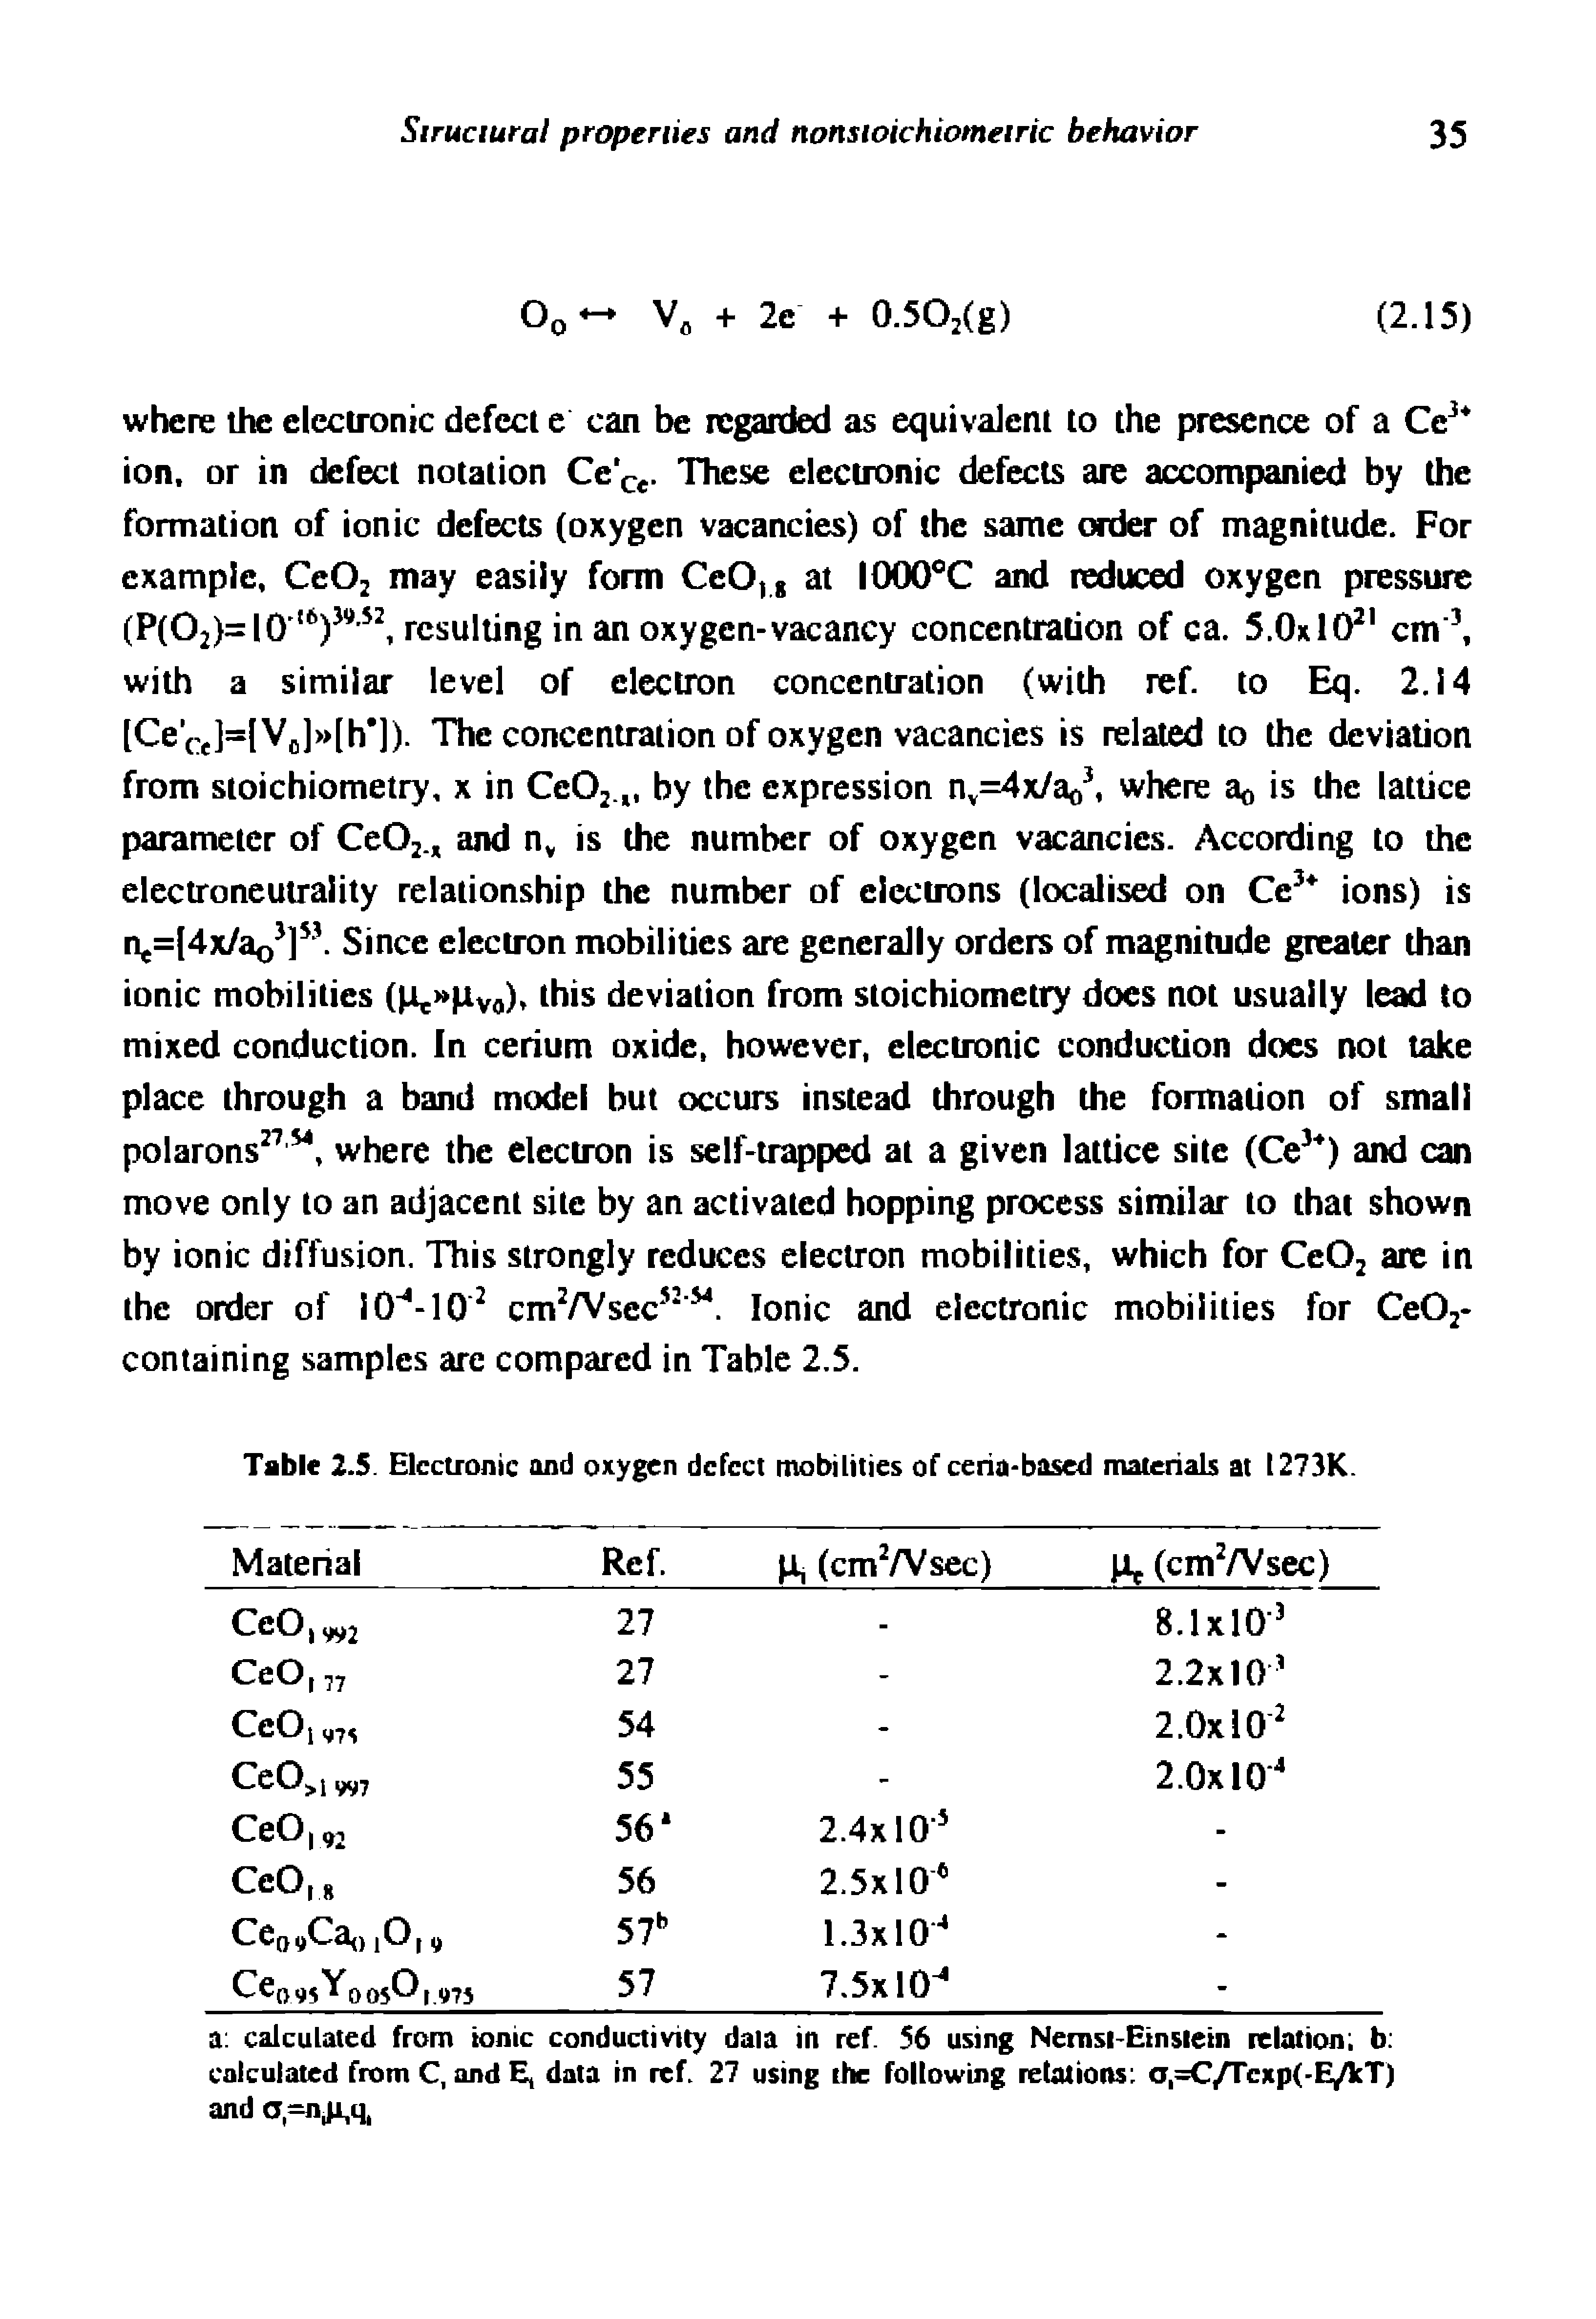 Table 2.5. Elccuonic and oxygen defect mobilities of ceria-bosed materials at 1273K.